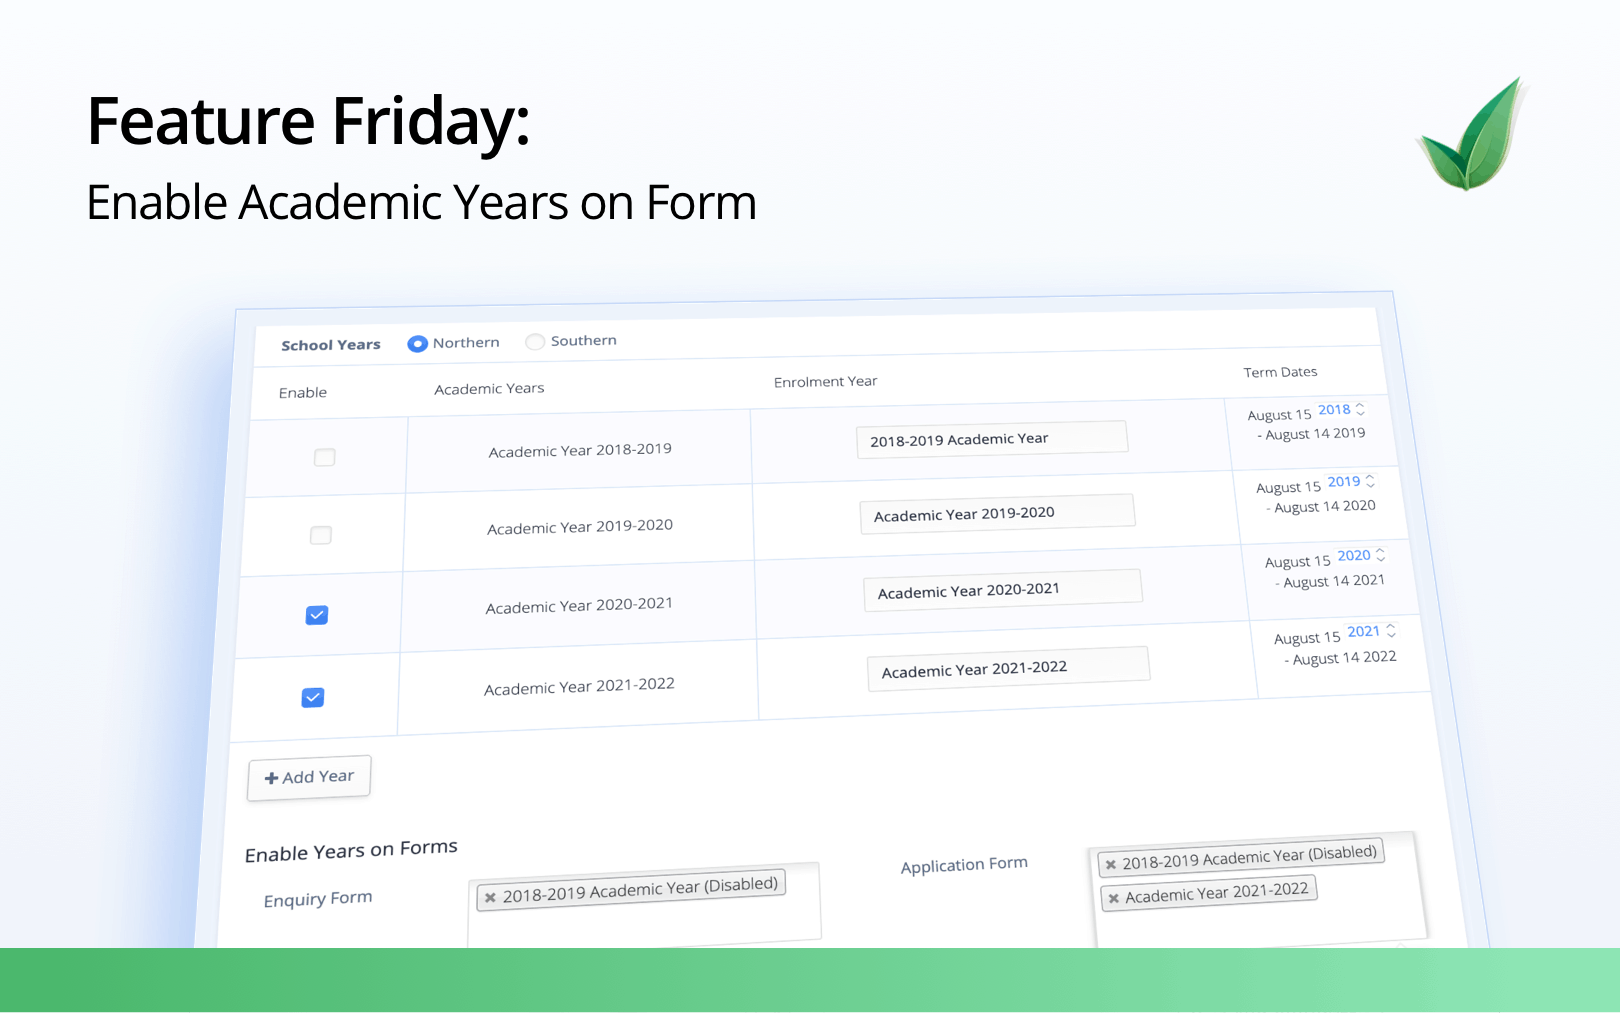 Feature Friday: Enable Academic Years by Form